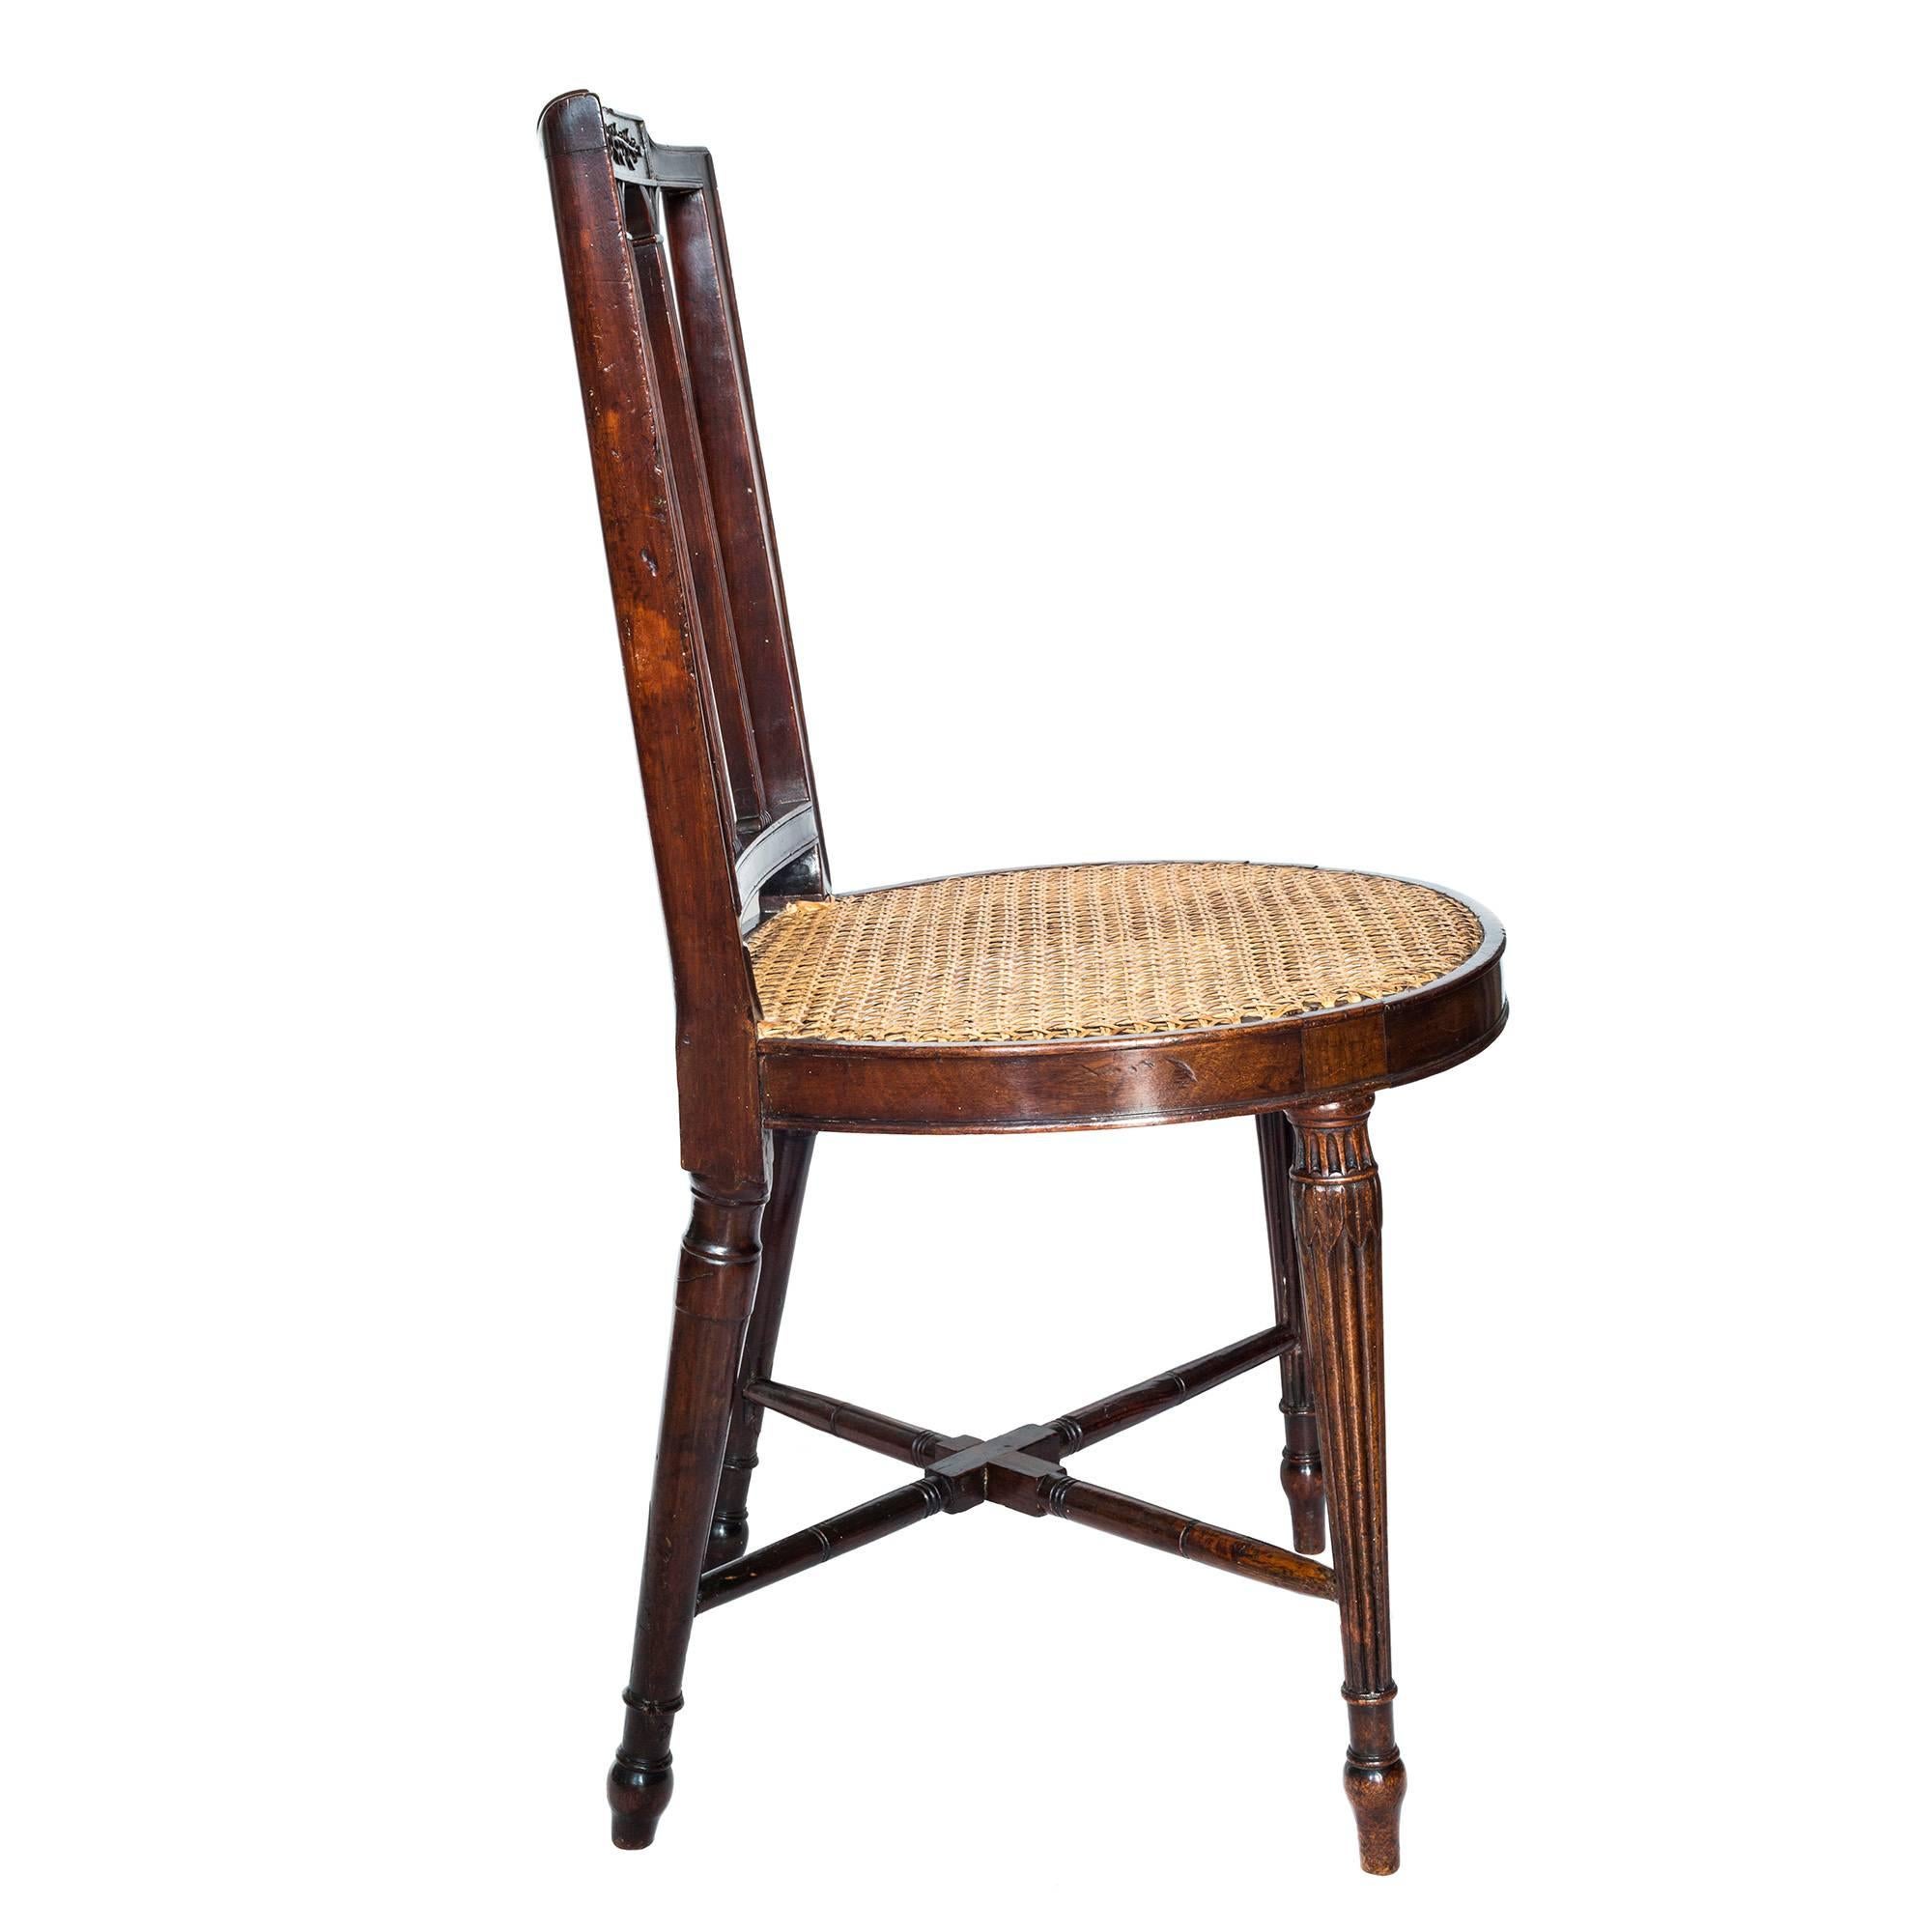 Cane Fine George III Period Neoclassical Mahogany Side Chair, Manner of Gillows